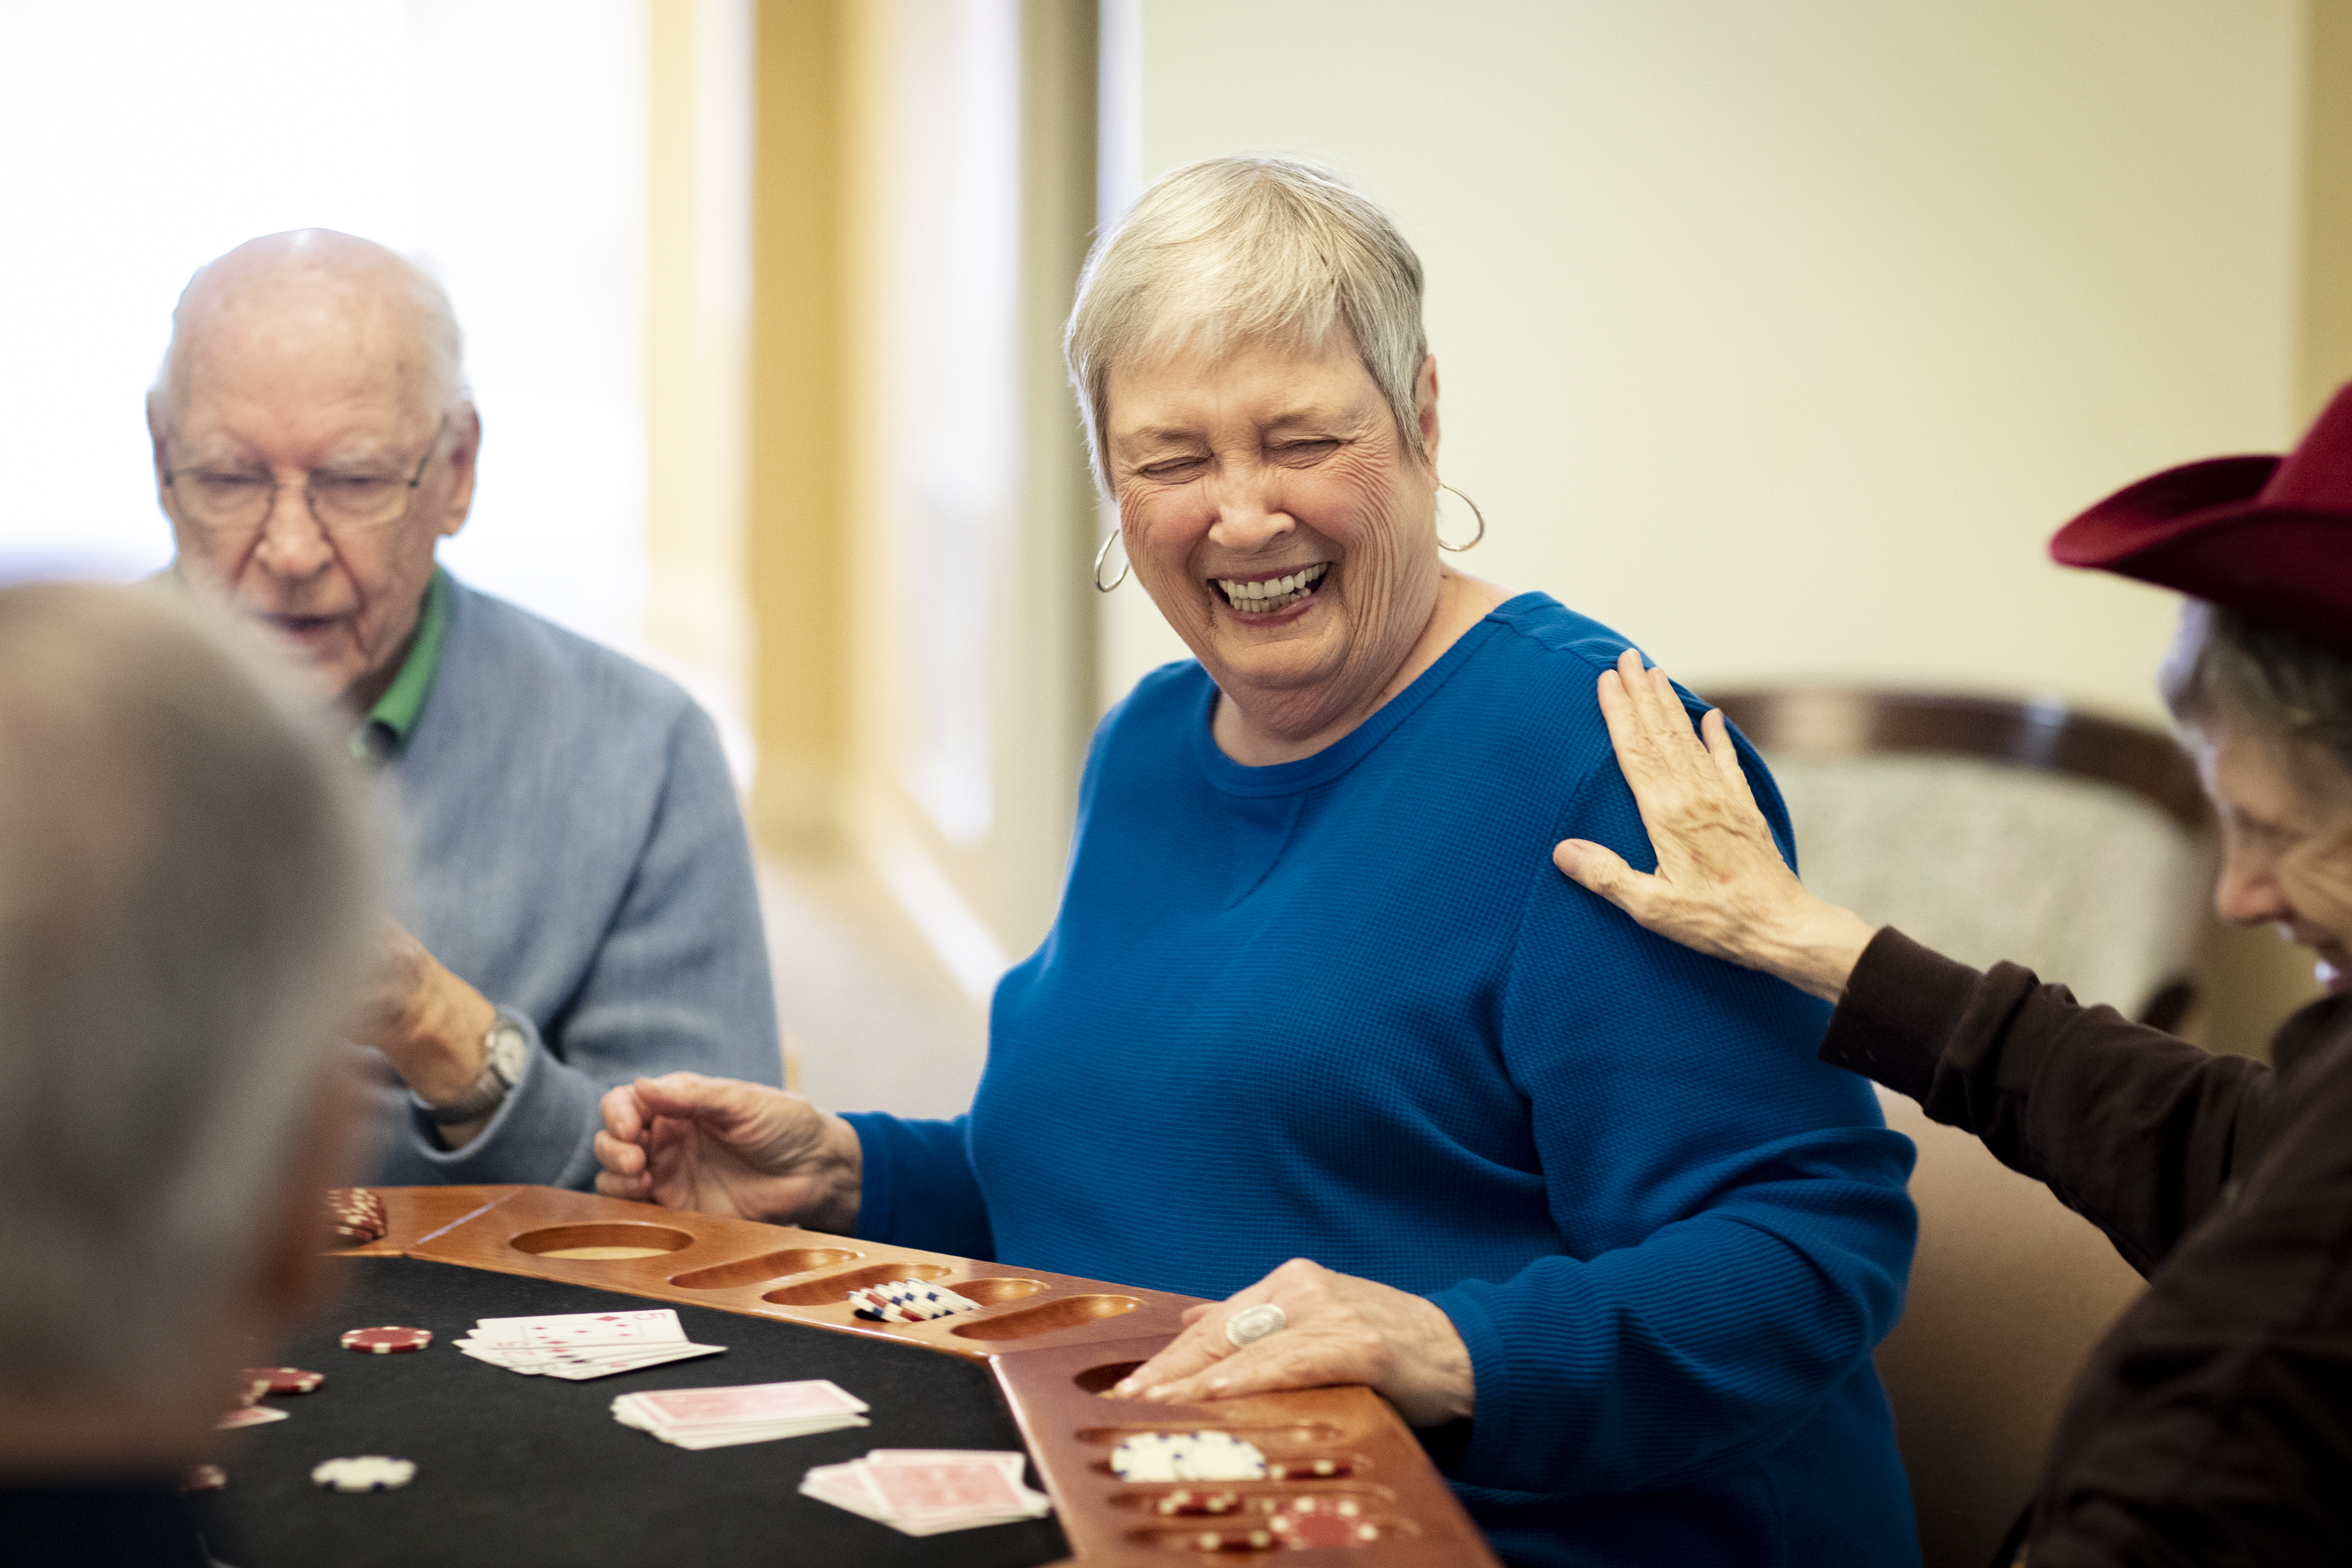 resident playing cards